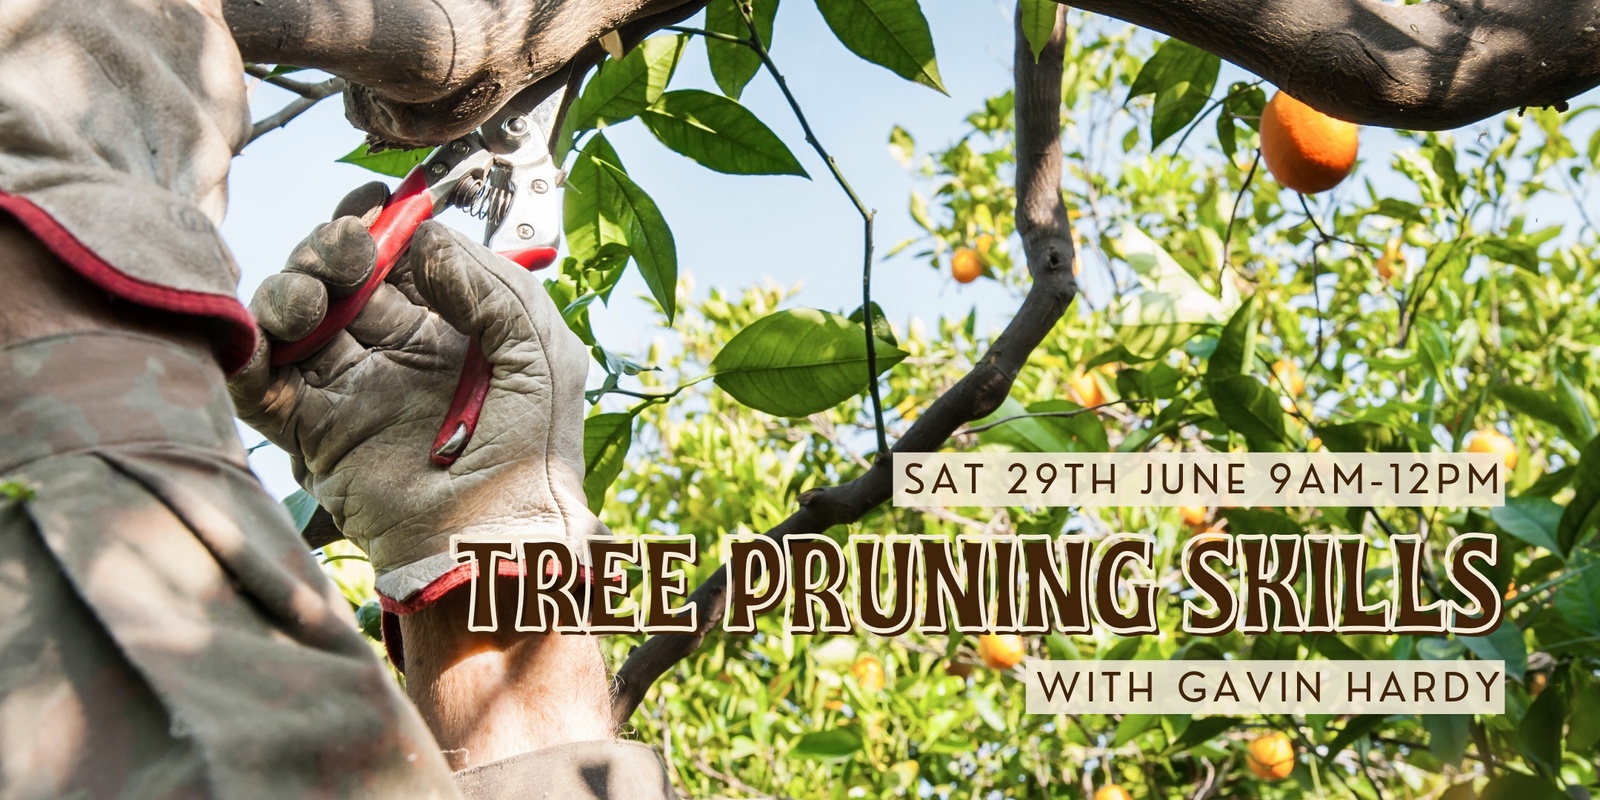 Banner image for Tree pruning skills with Gavin Hardy